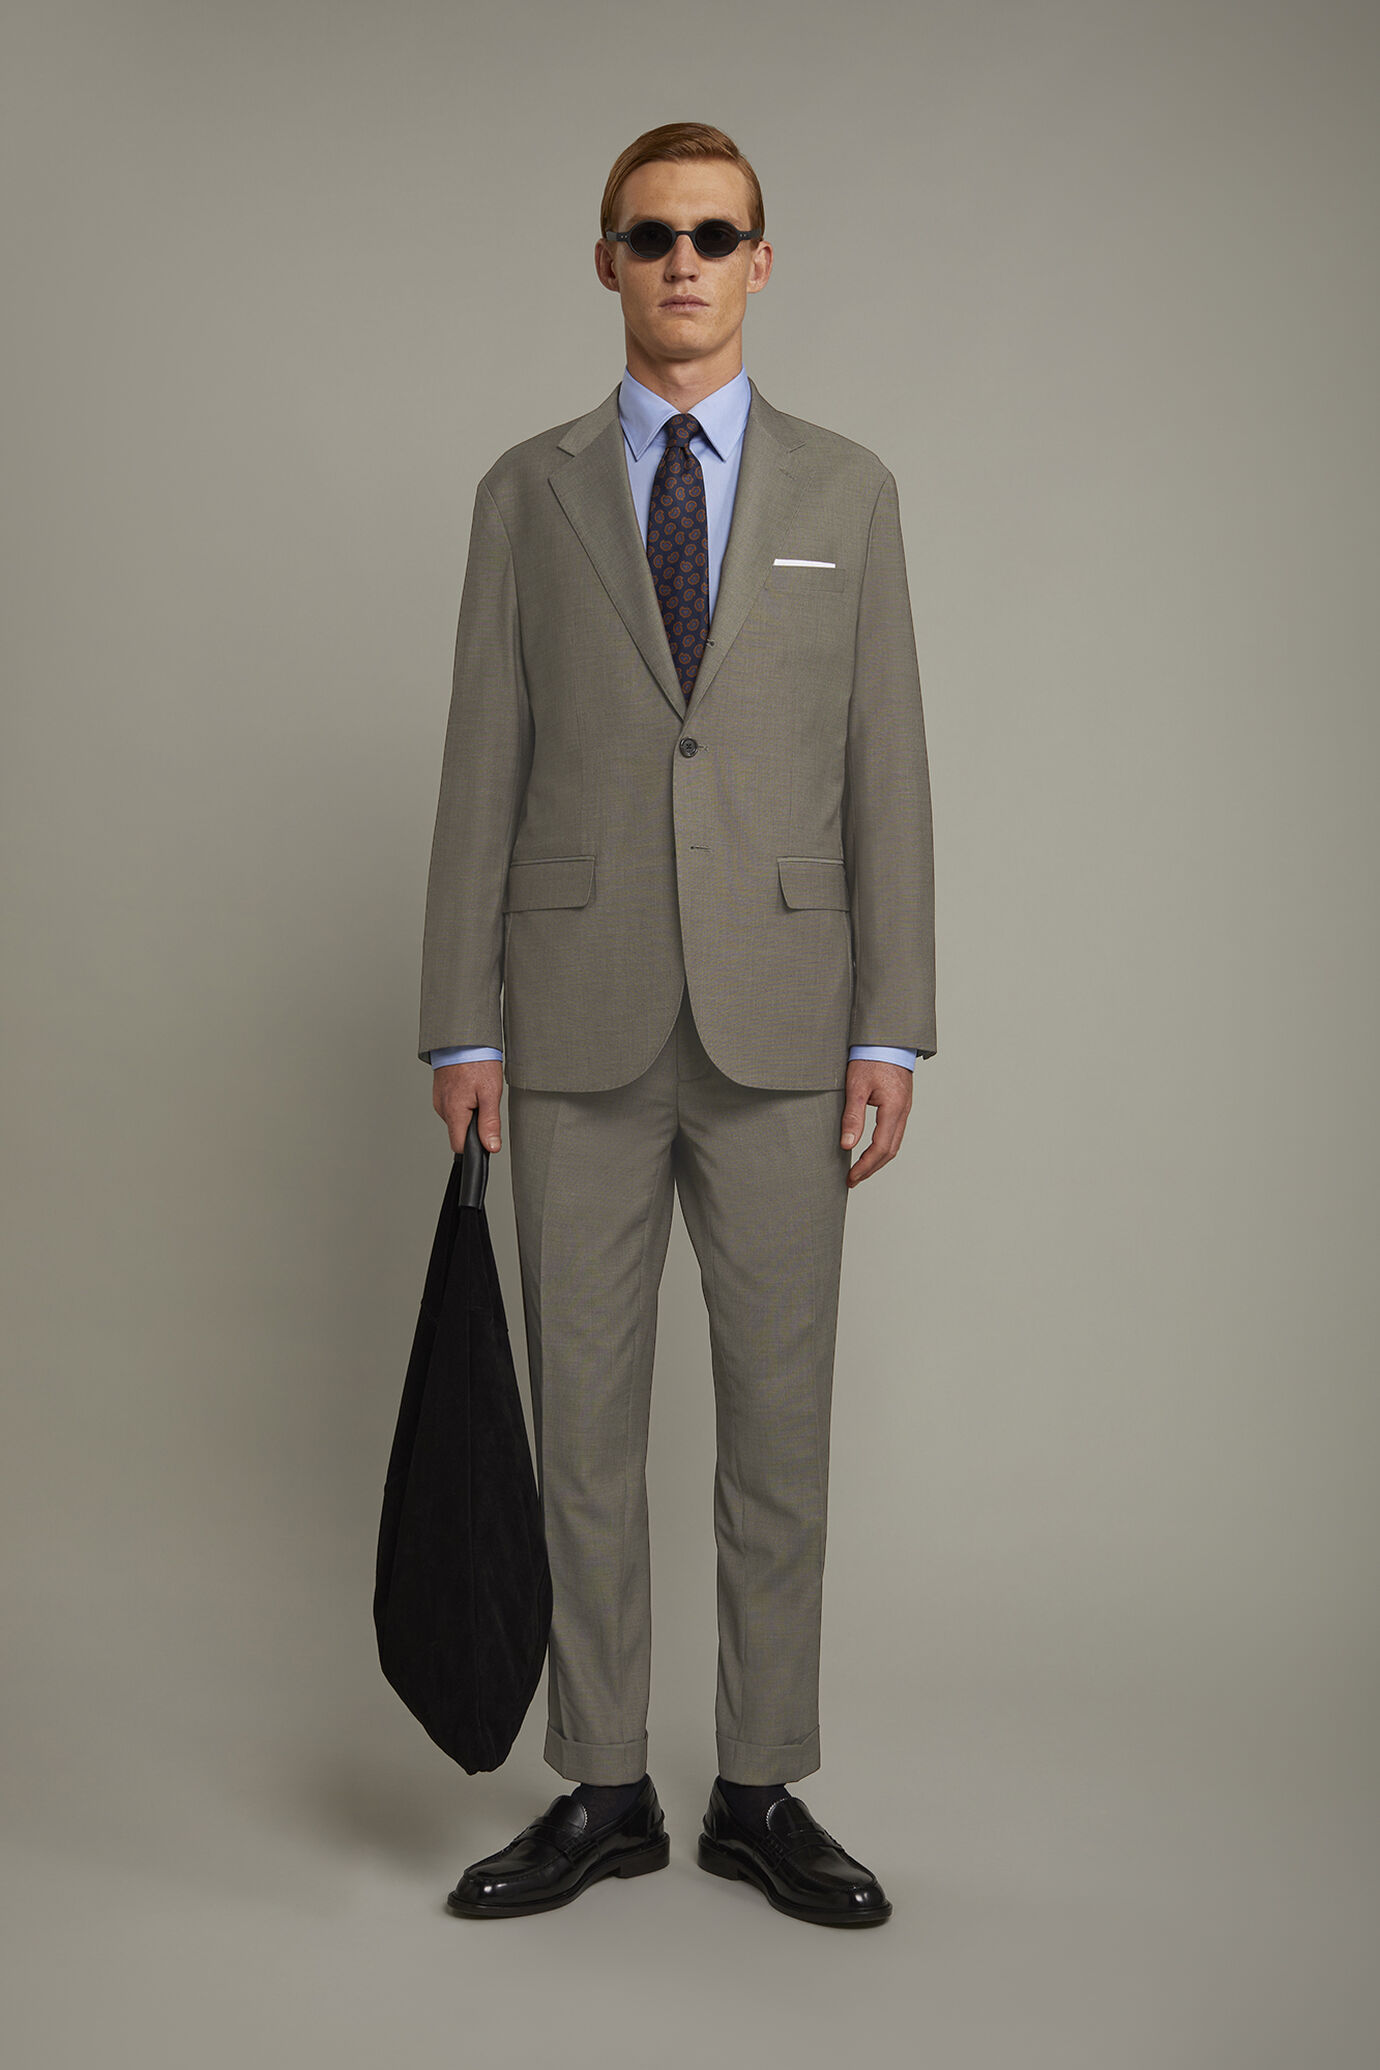 Men's single-breasted suit with regular fit partridge eye design